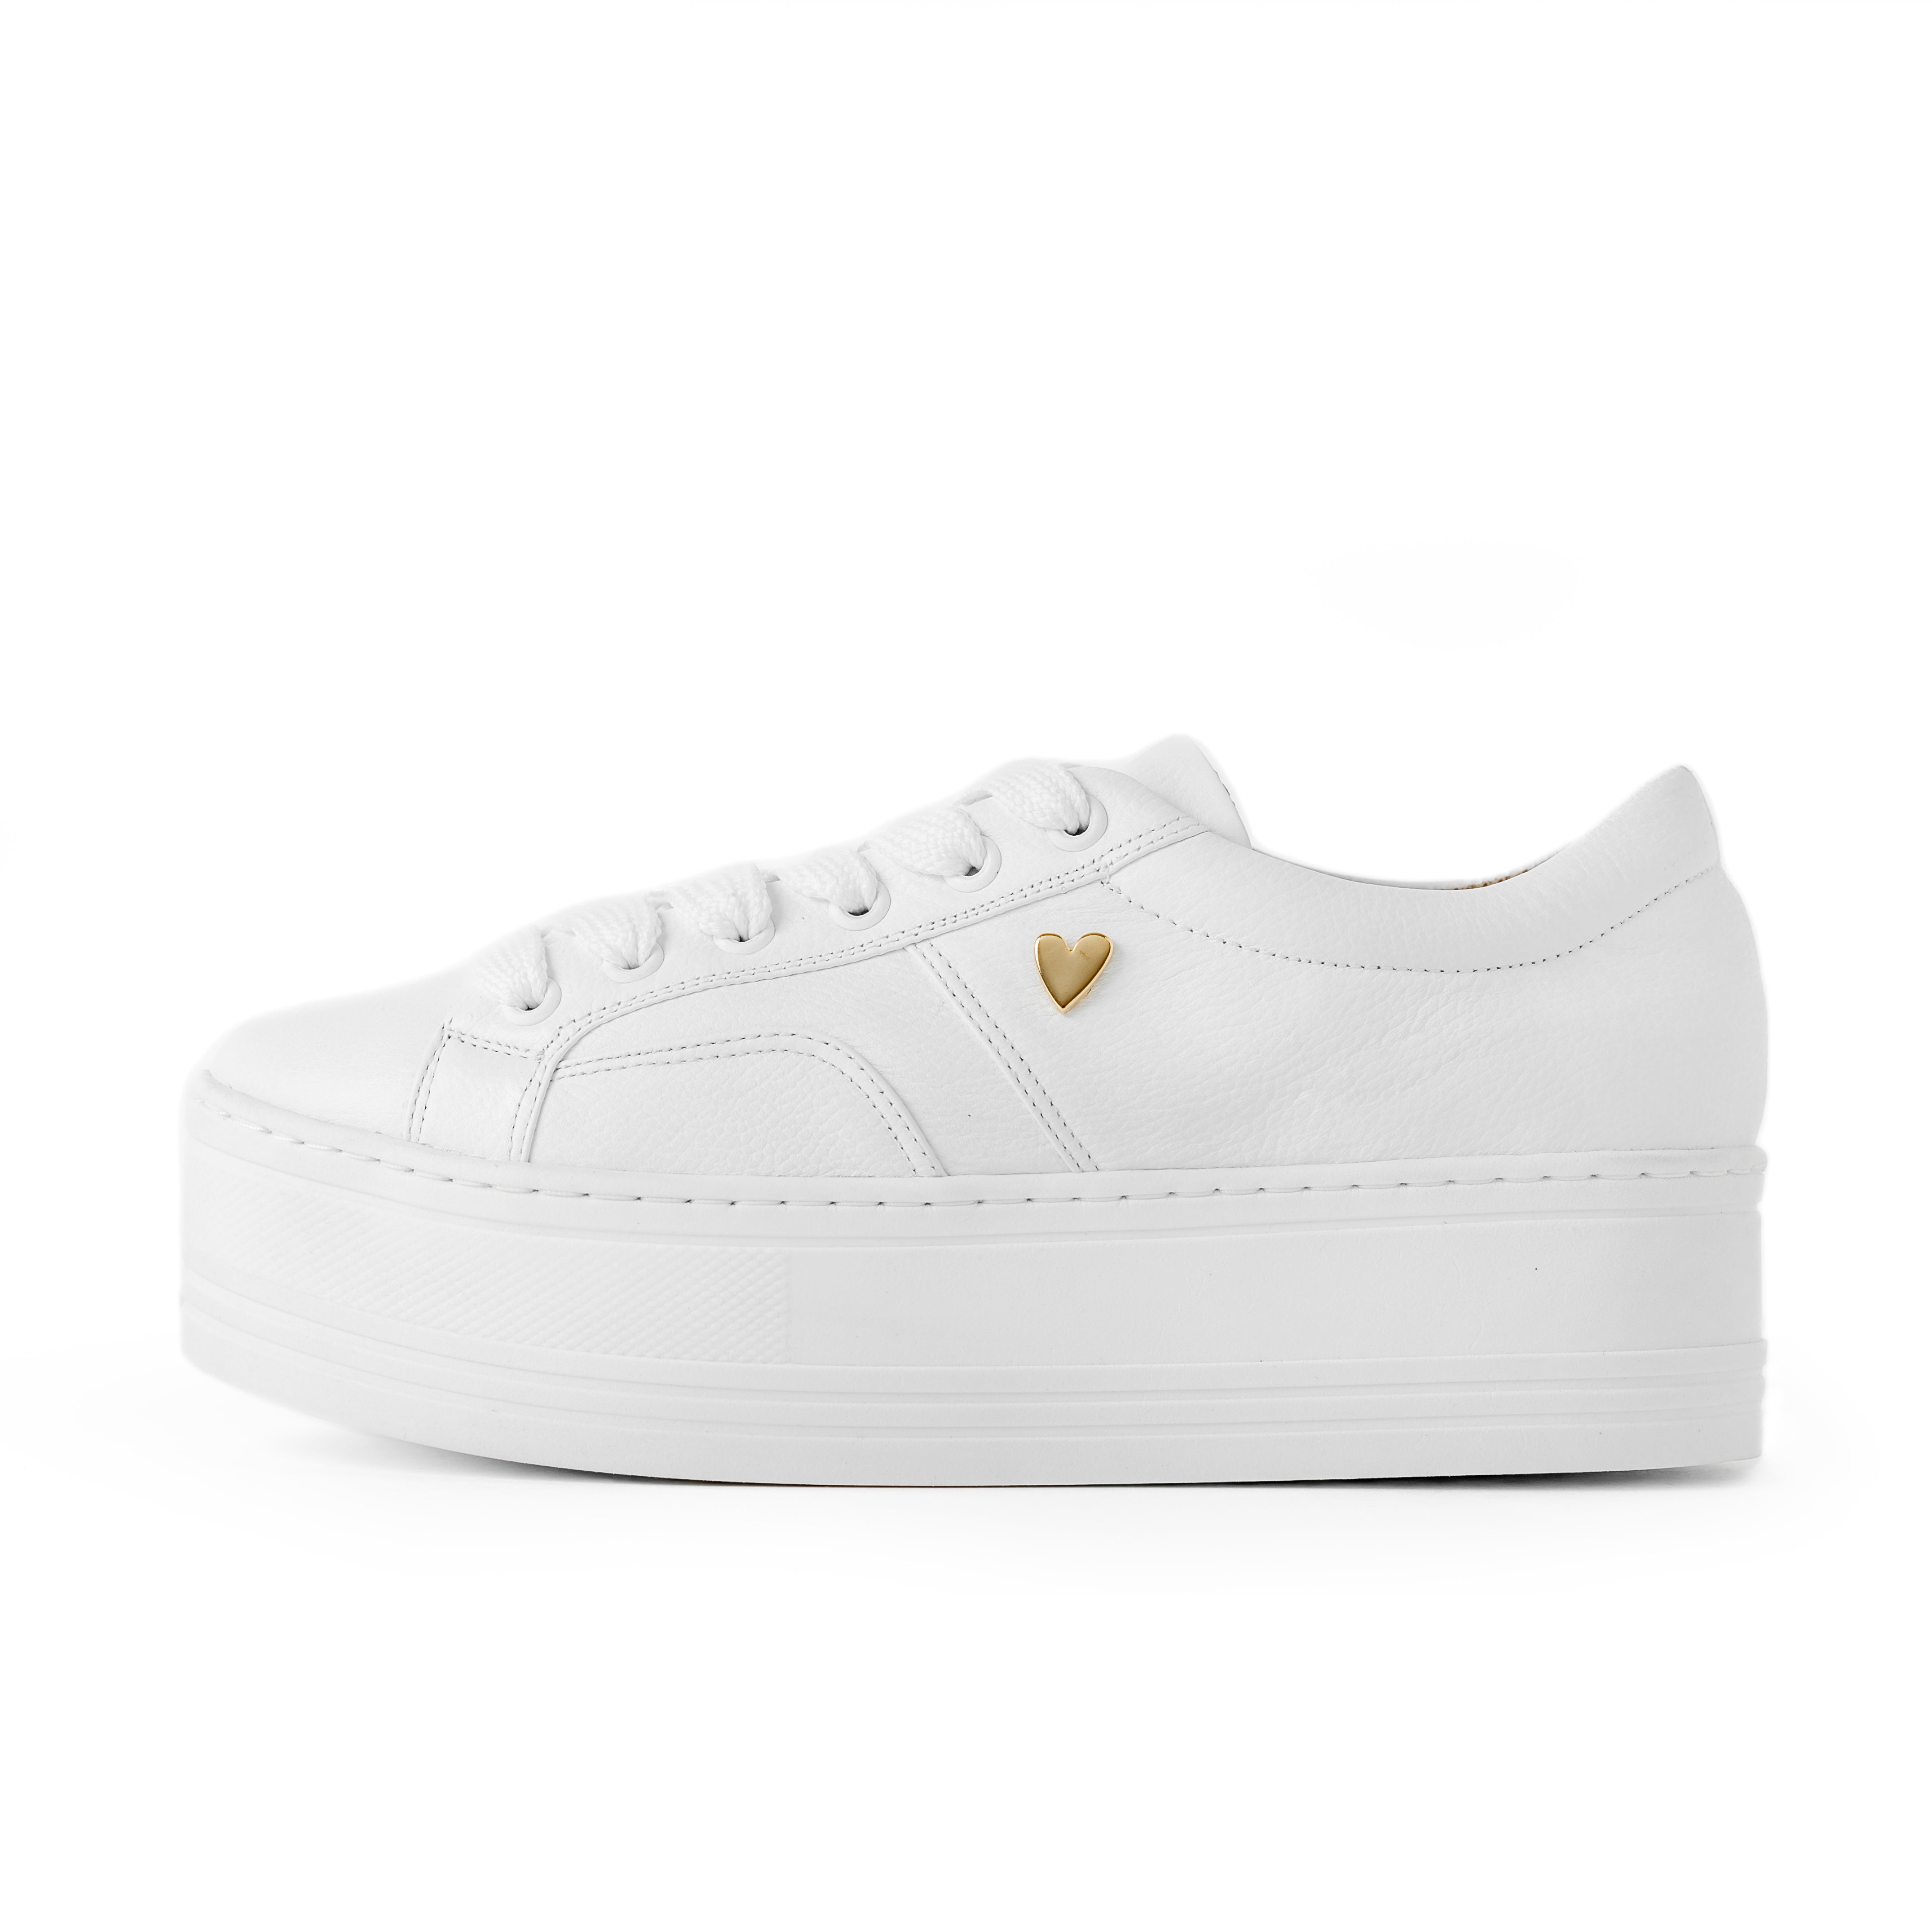 Hannan White Sneakers - Genuine Leather